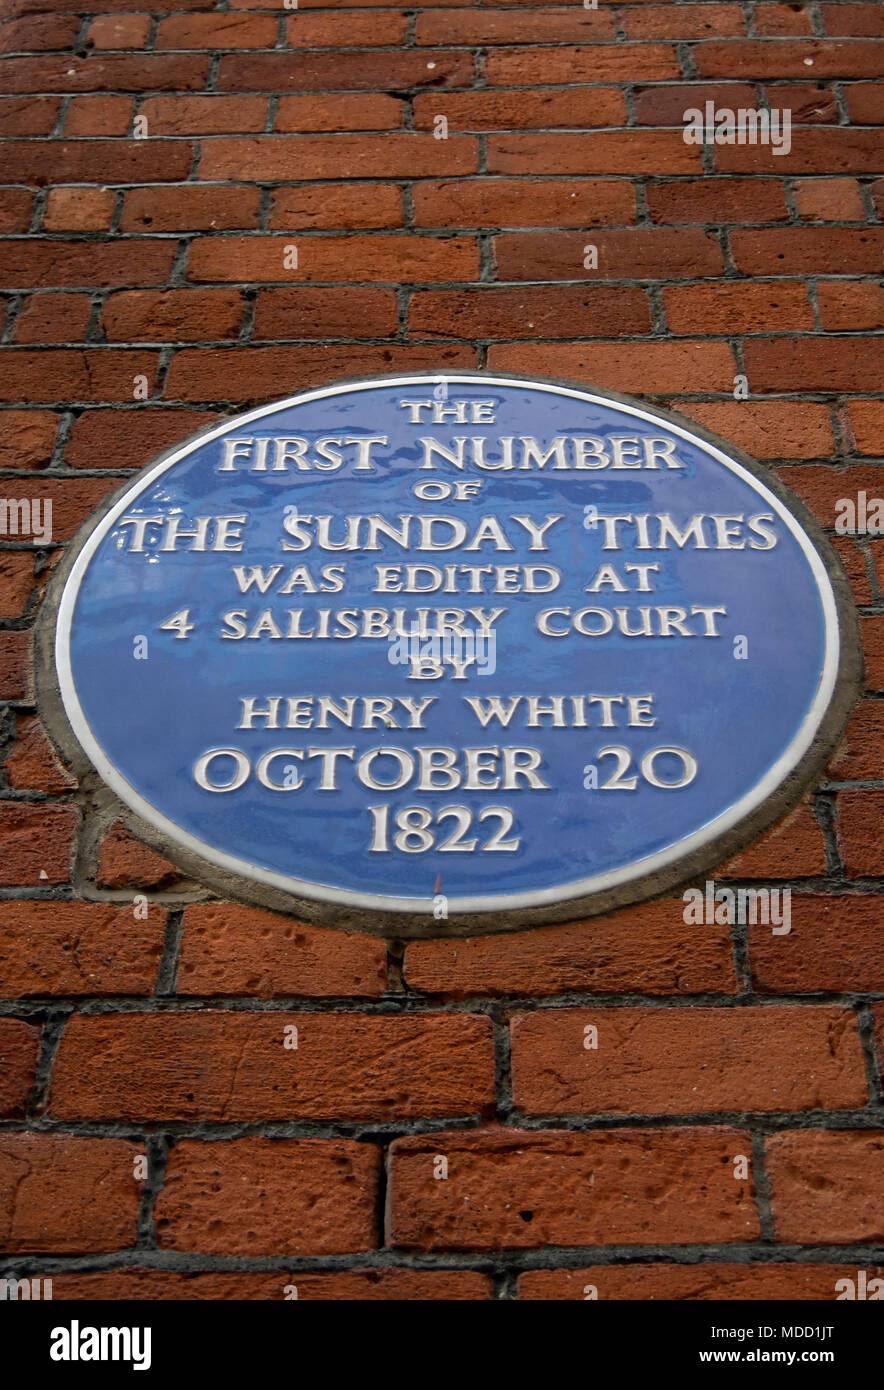 blue plaque marking the site where the first edition of the sunday times newspaper was edited in 1822, salisbury court, london, england Stock Photo